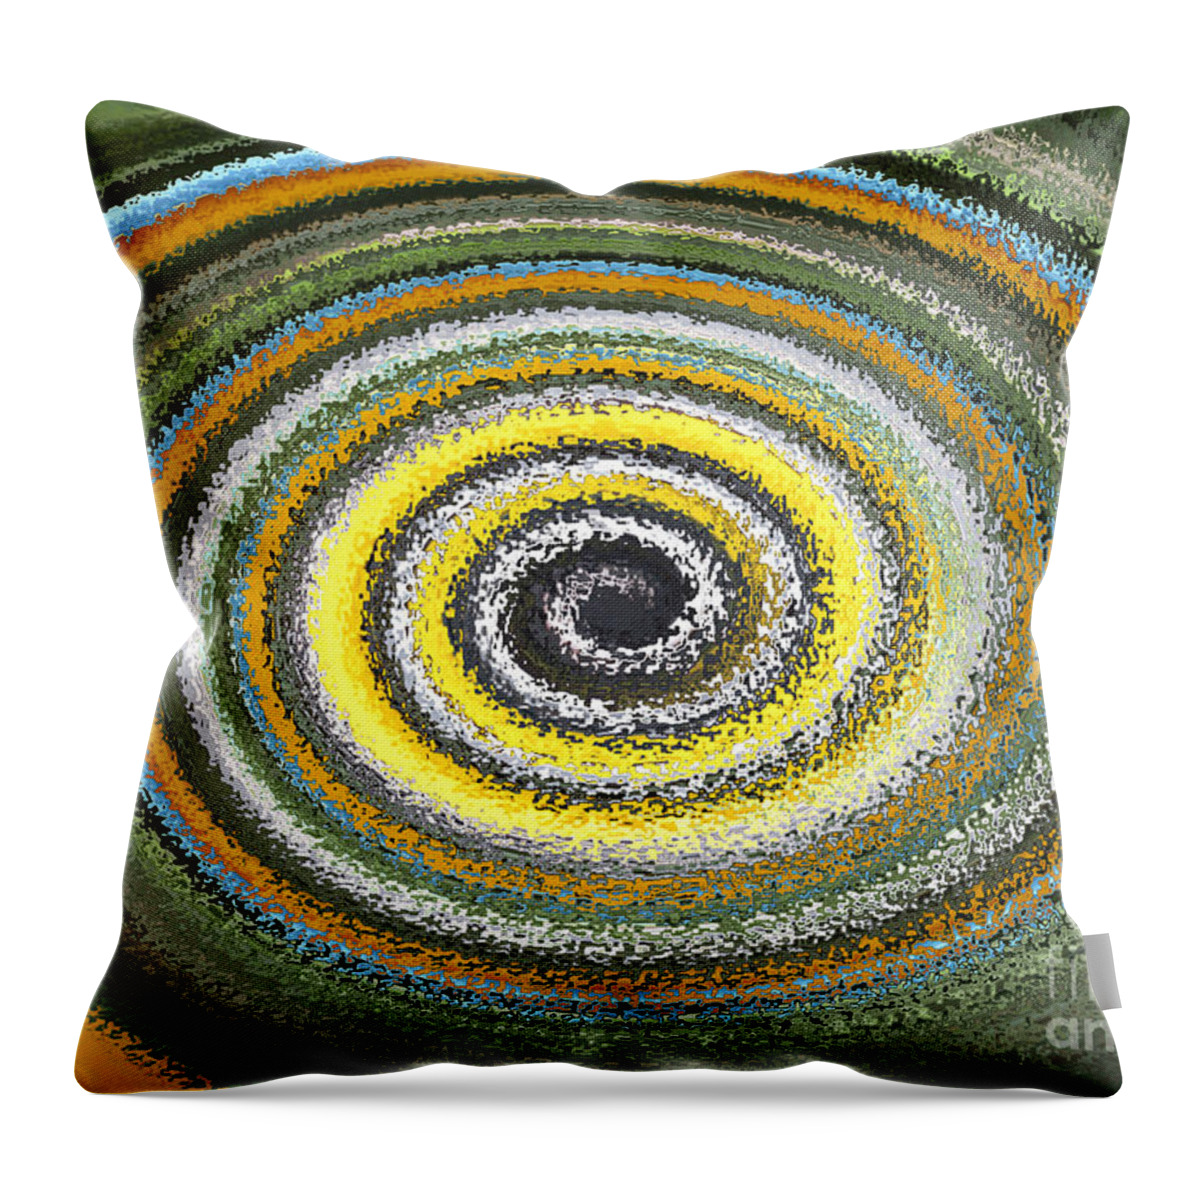 Abstract Throw Pillow featuring the photograph Swirl Abstract 1 by Julia Stubbe